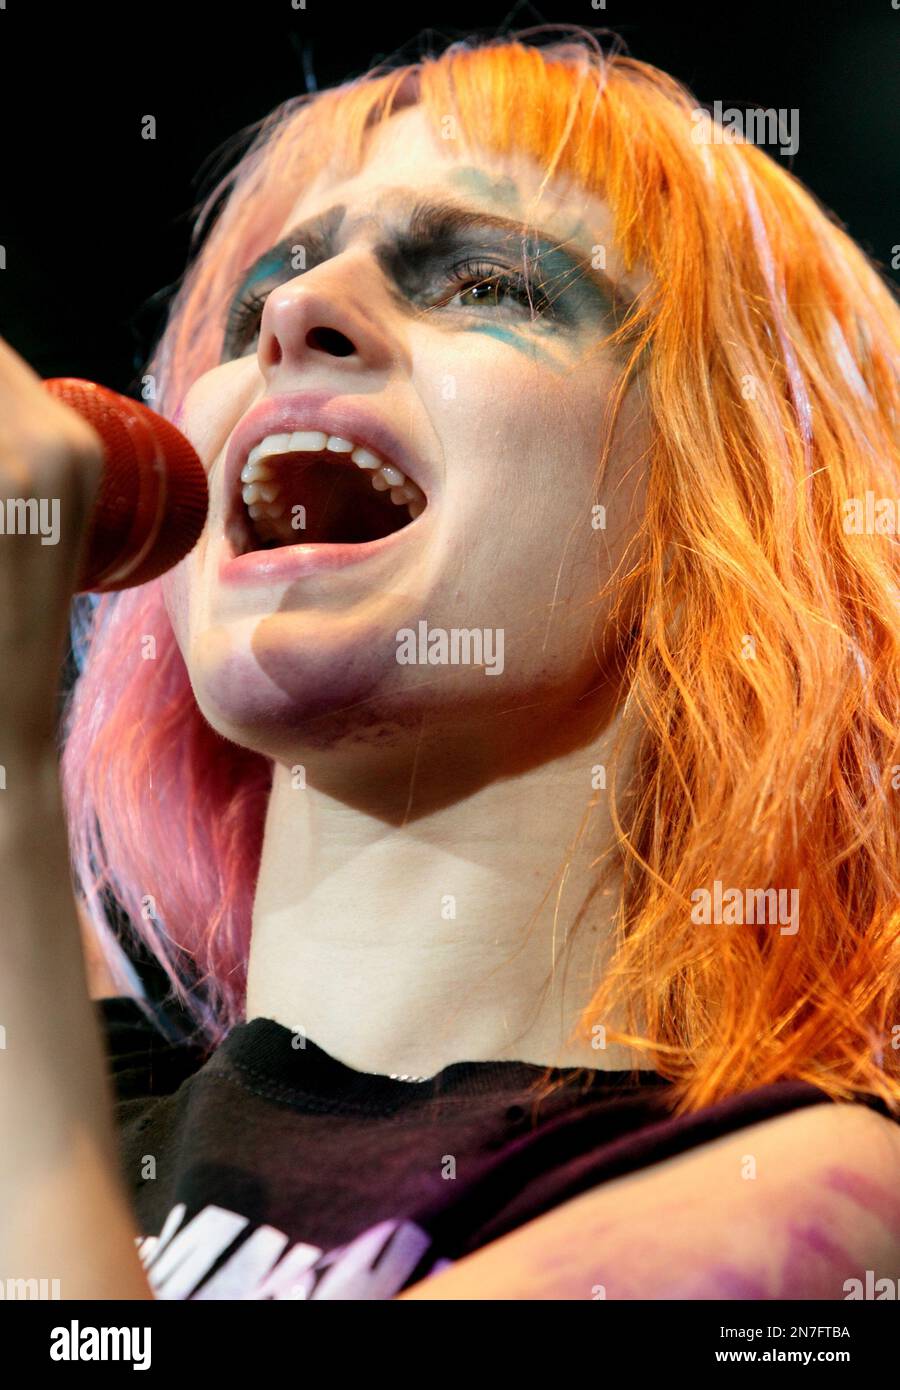 Hayley Williams of the rock band Paramore performs on stage during